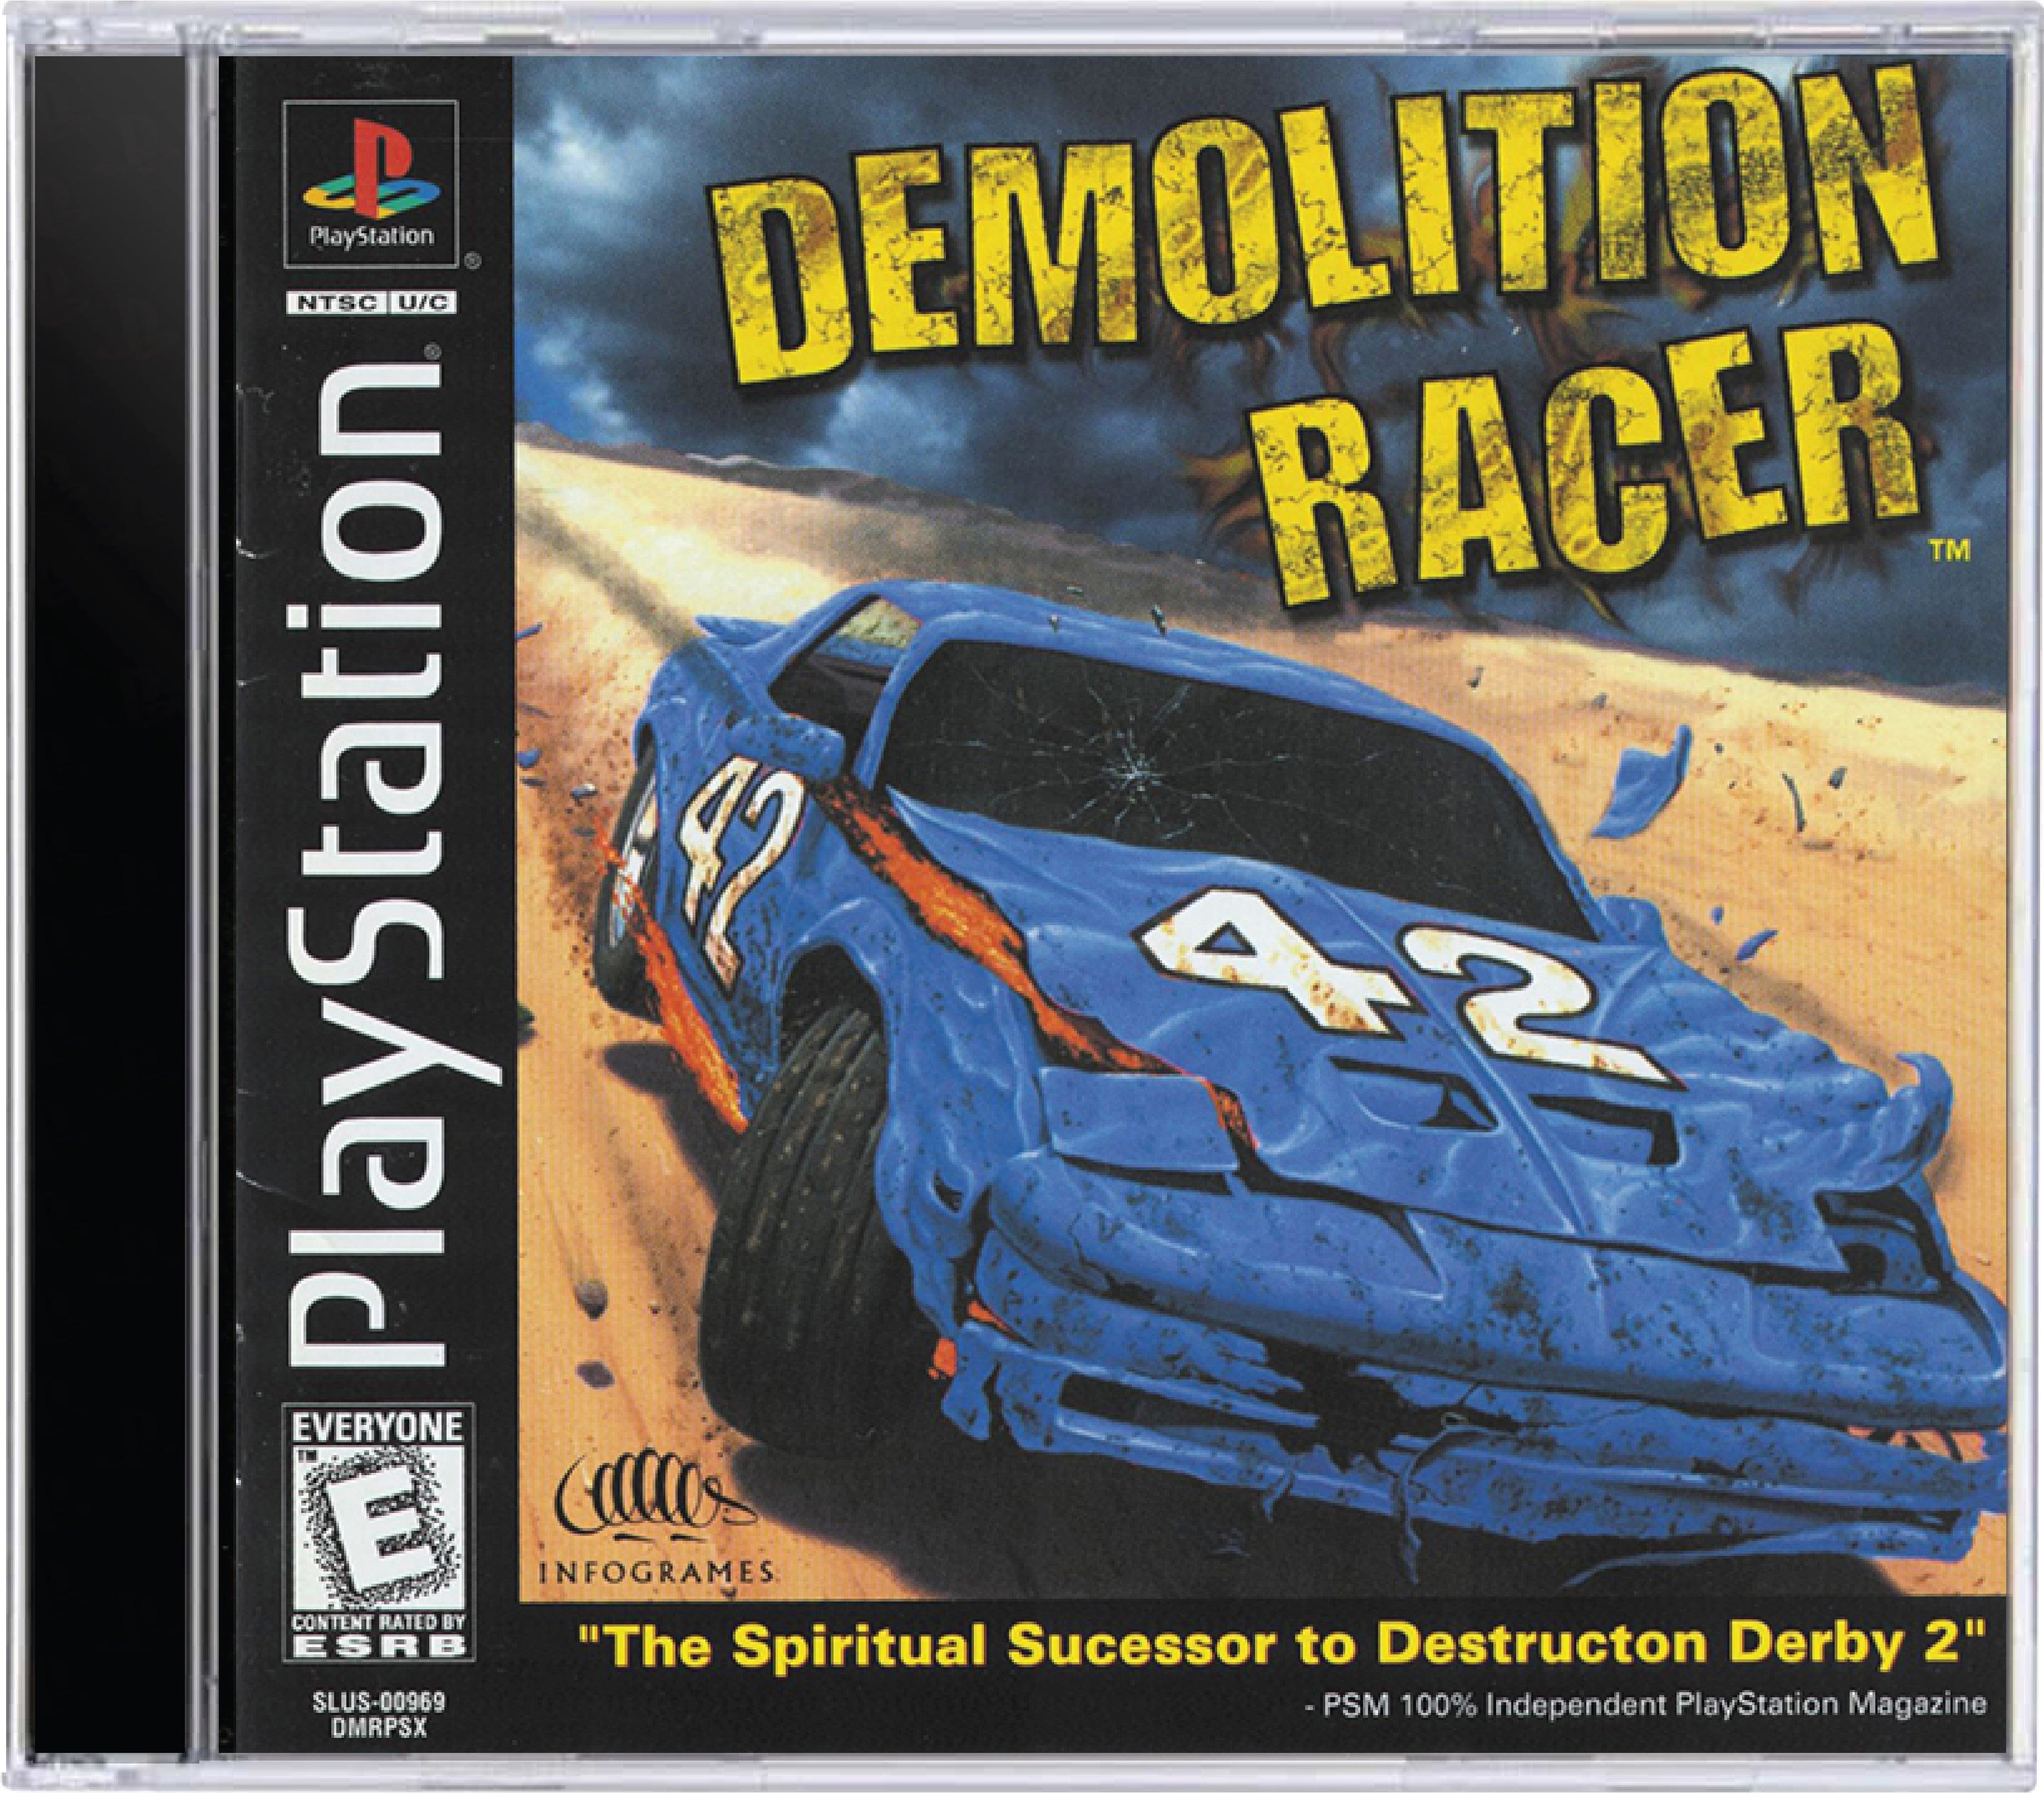 Demolition Racer Cover Art and Product Photo